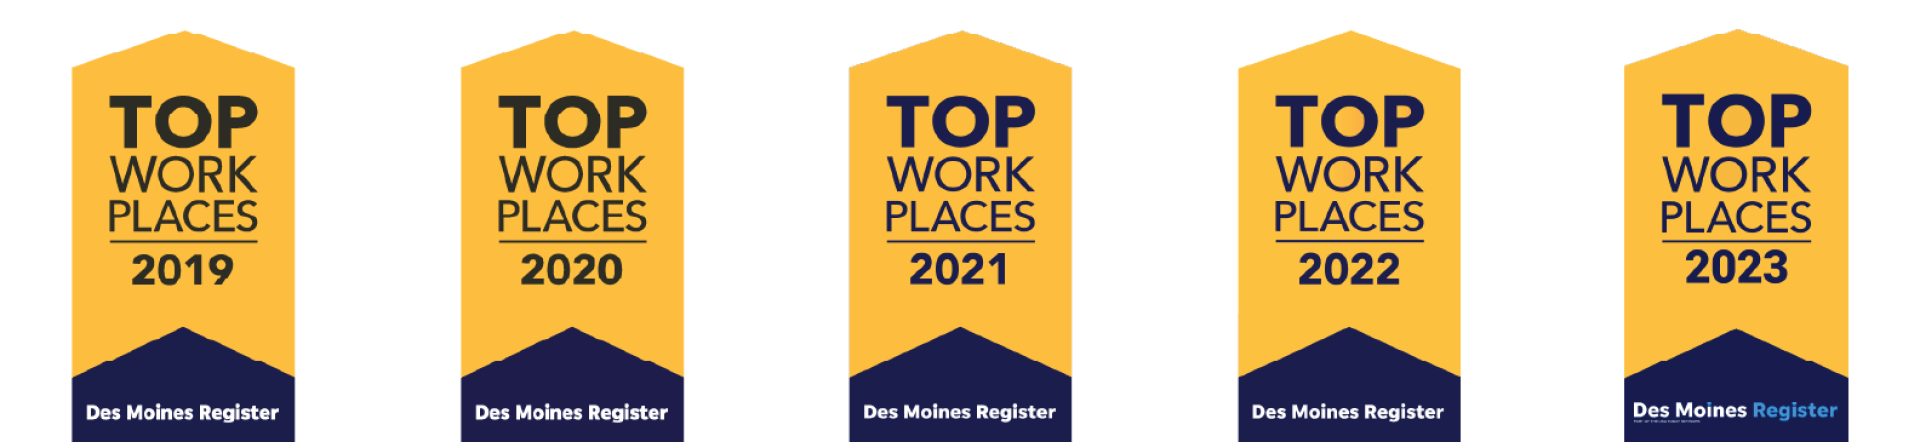 Top Workplaces banners for Cardinal CSD: 2019 through 2023